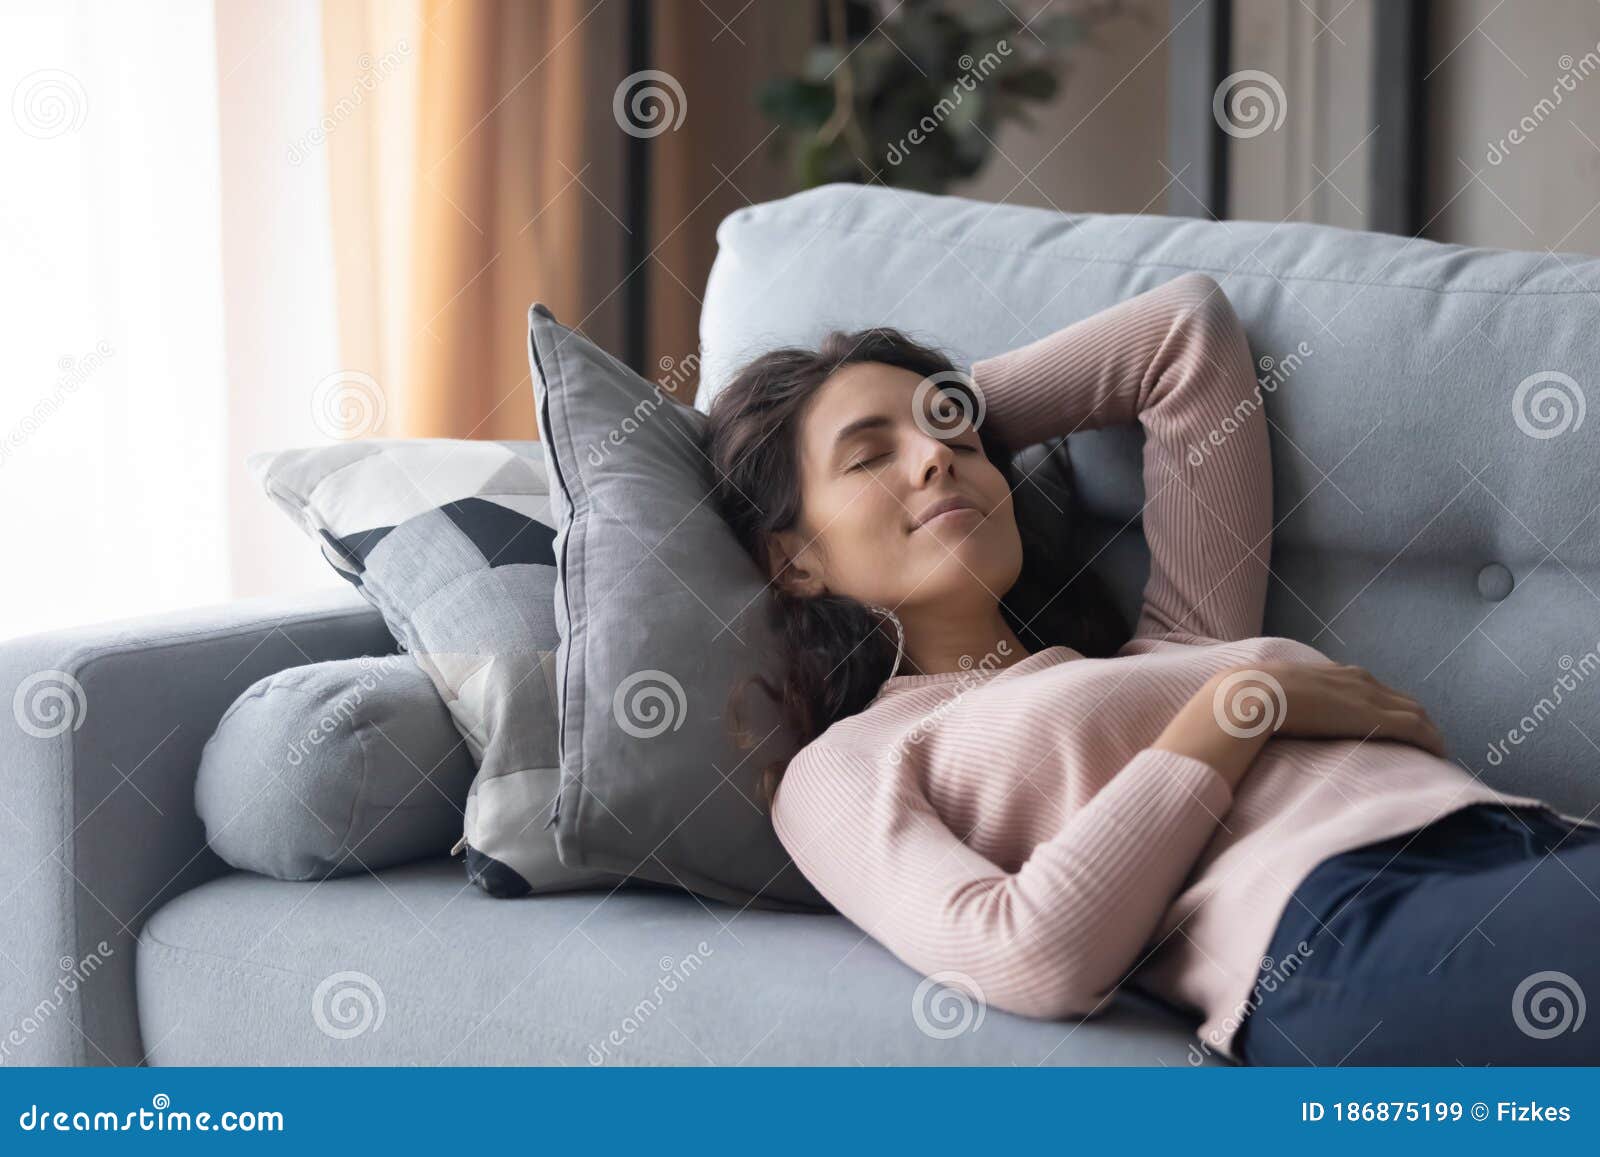 Peaceful Beautiful Woman Sleeping On Cozy Couch In Living Room Stock Image Image Of Beautiful 